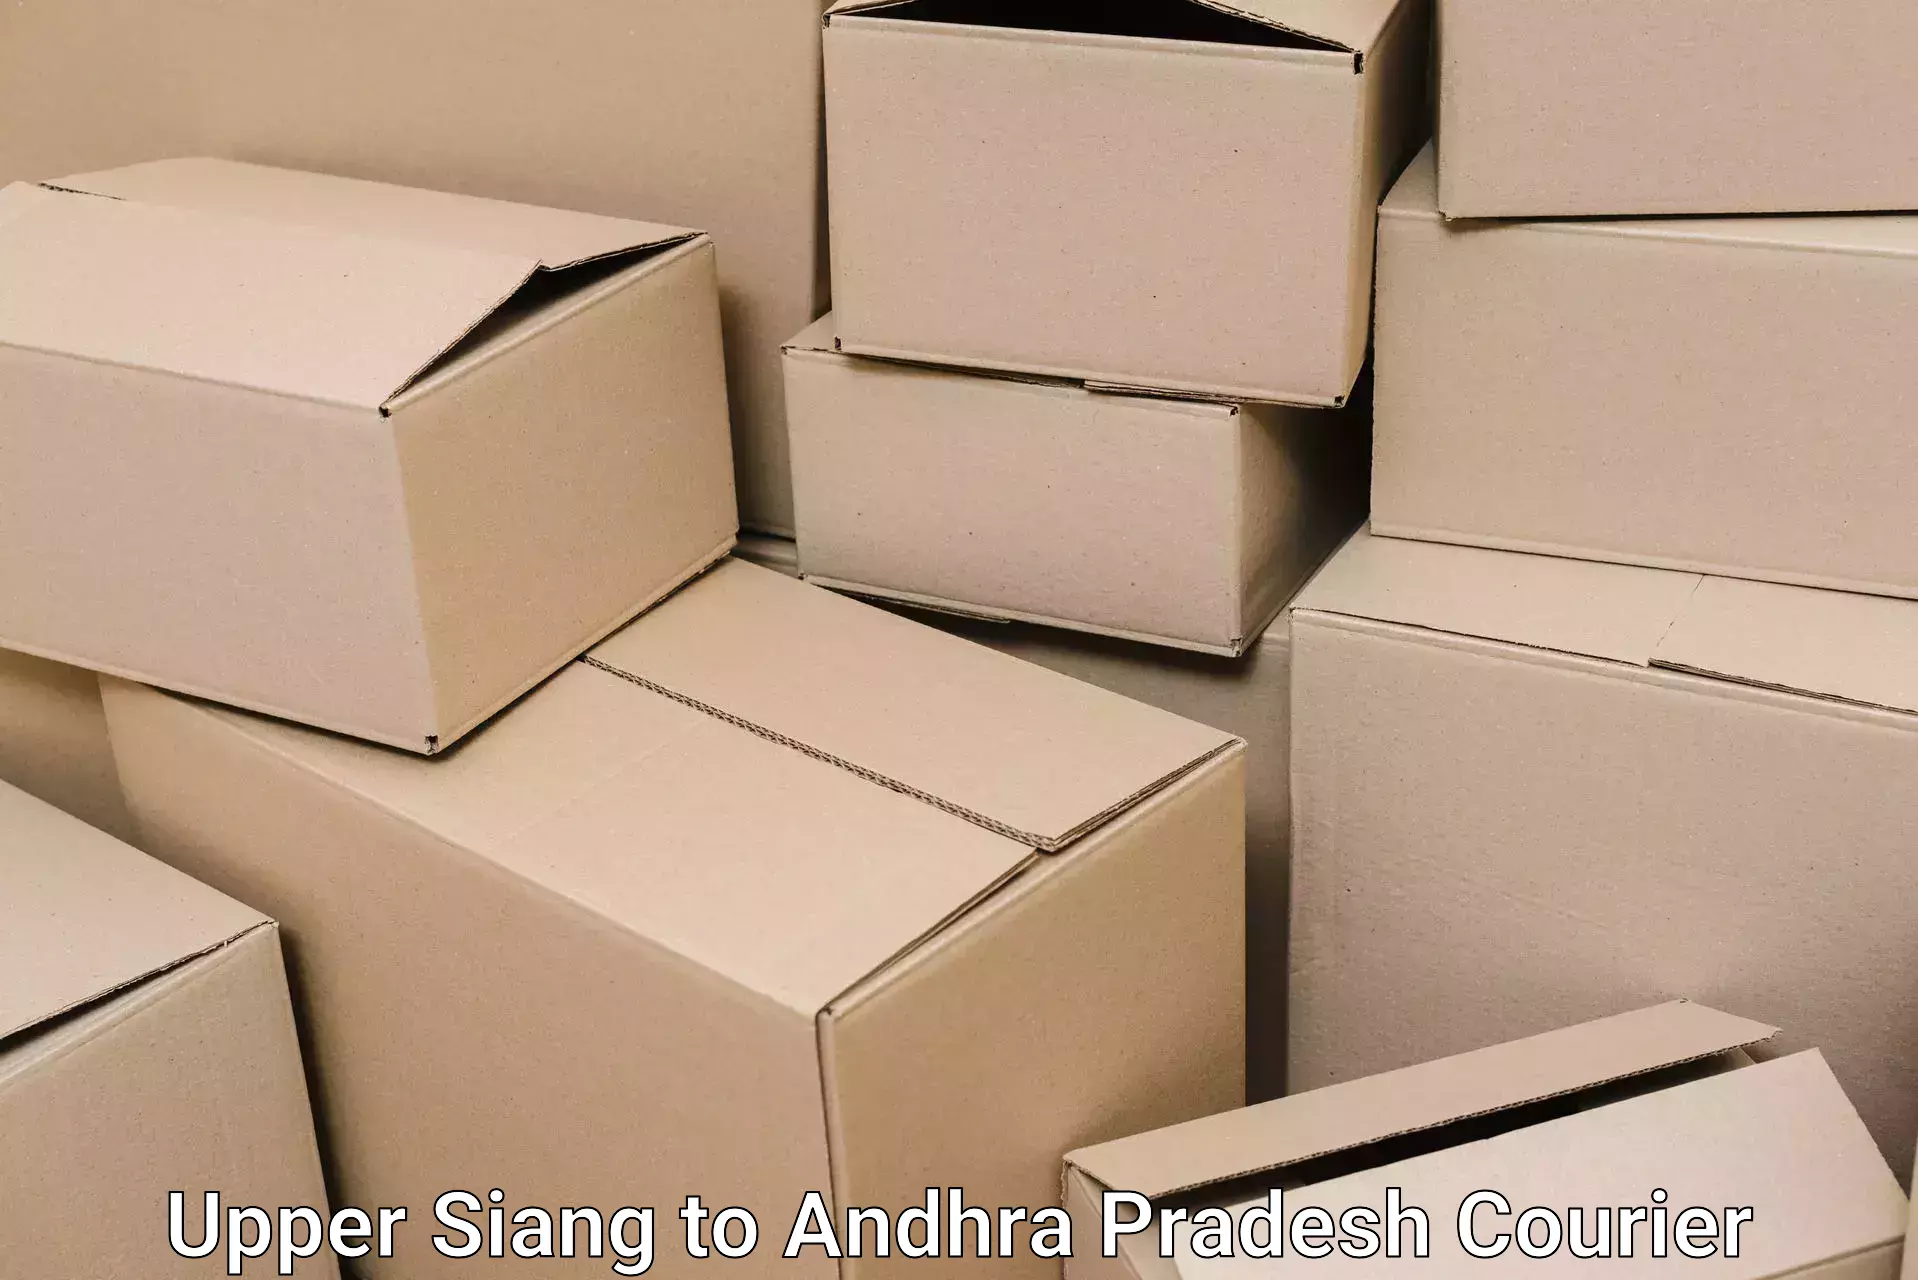 Quality relocation services in Upper Siang to Visakhapatnam